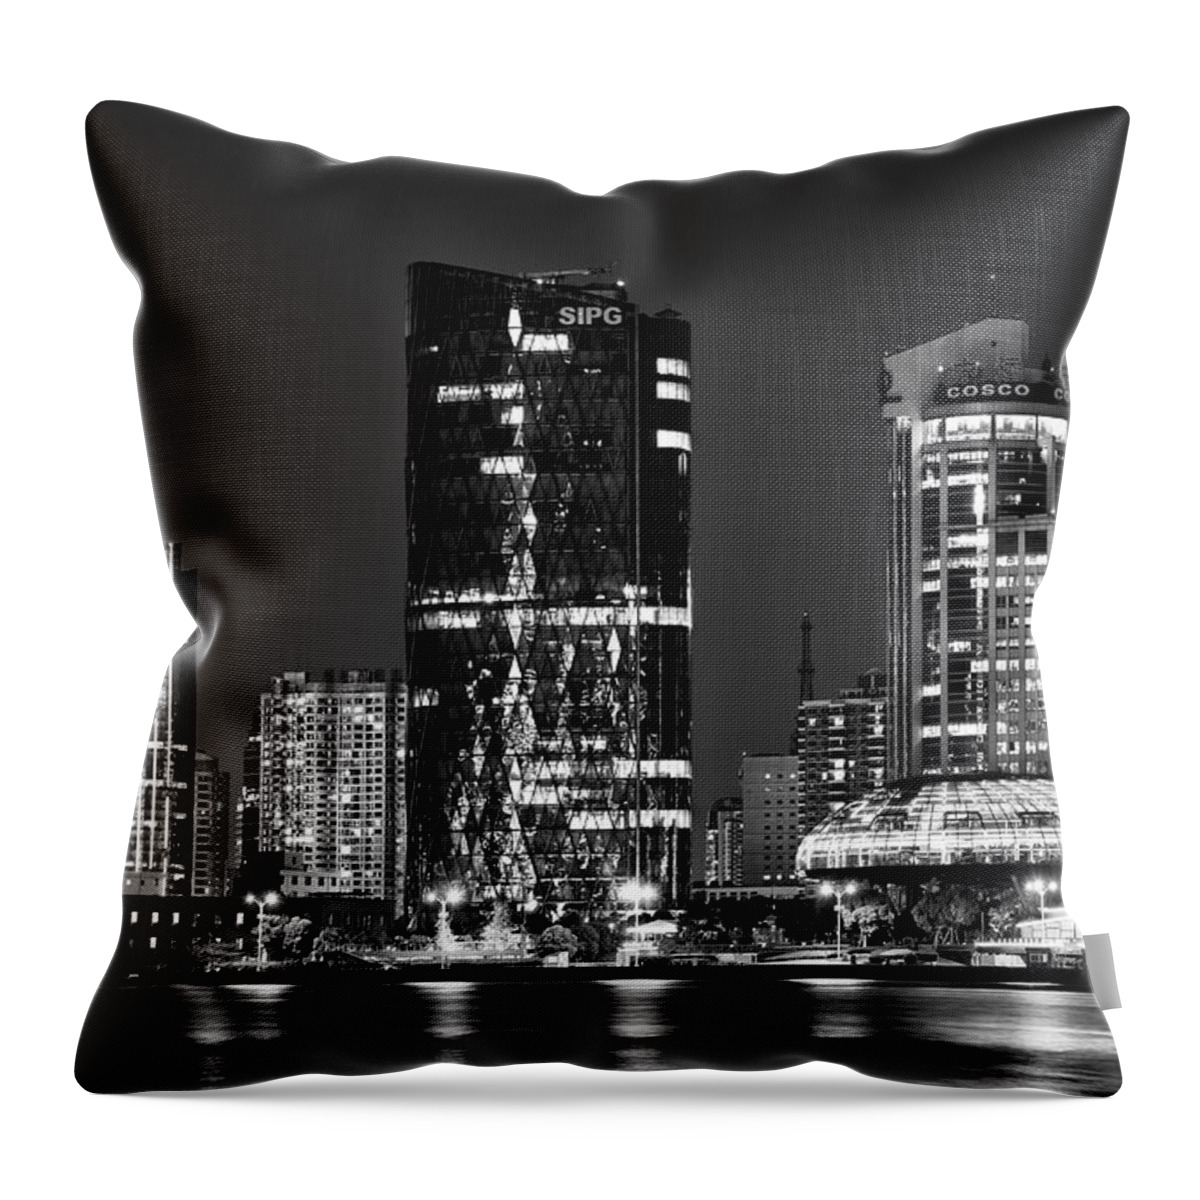 Tranquility Throw Pillow featuring the photograph Sipg Tower - Shanghai by Photographer - Rob Smith